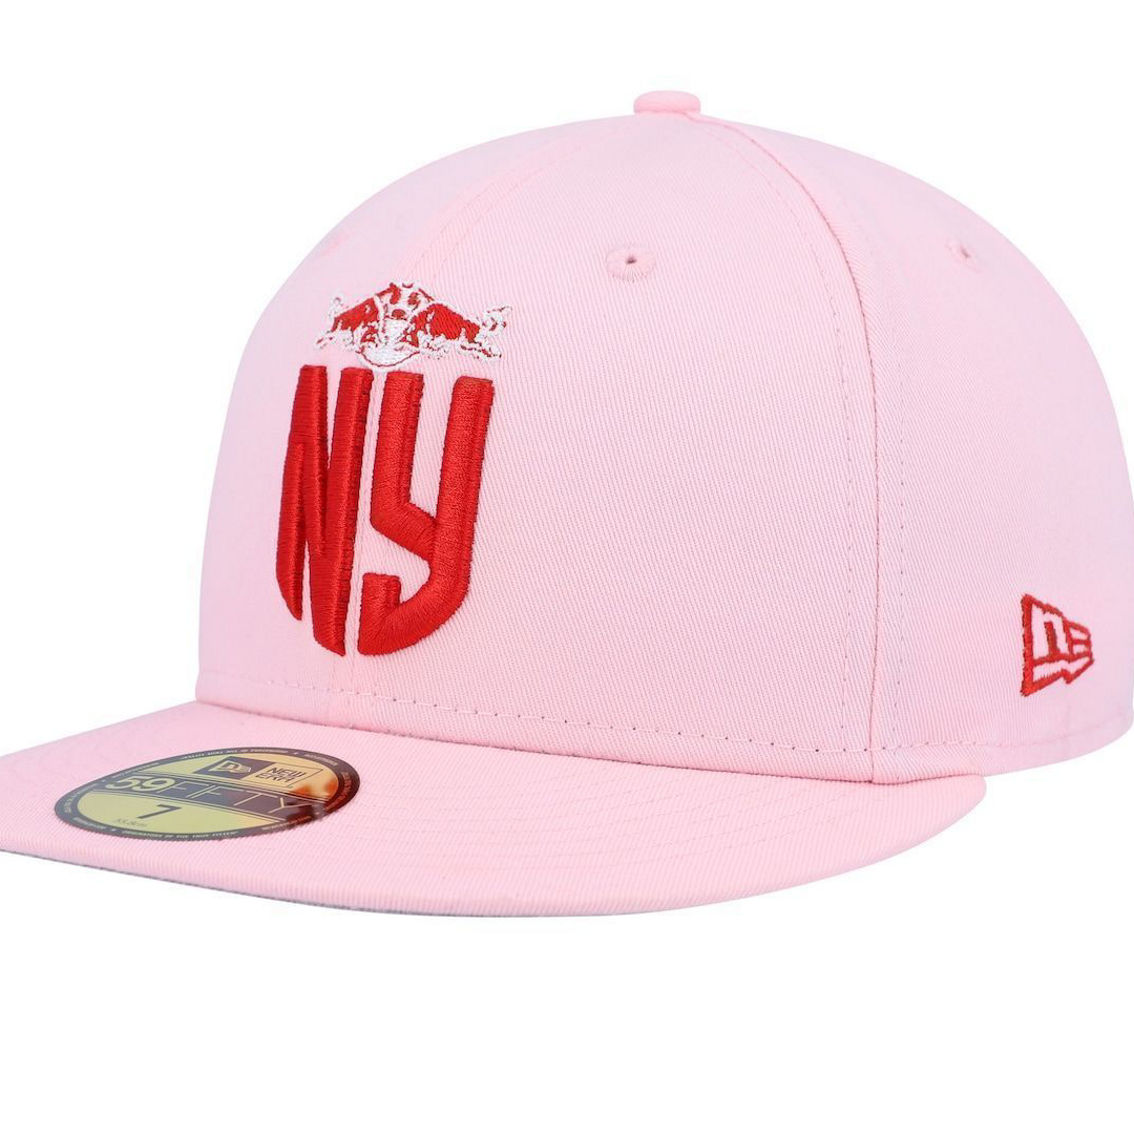 Men's New Era Pink New York Red Bulls Pastel Pack 59FIFTY Fitted Hat - Image 2 of 4